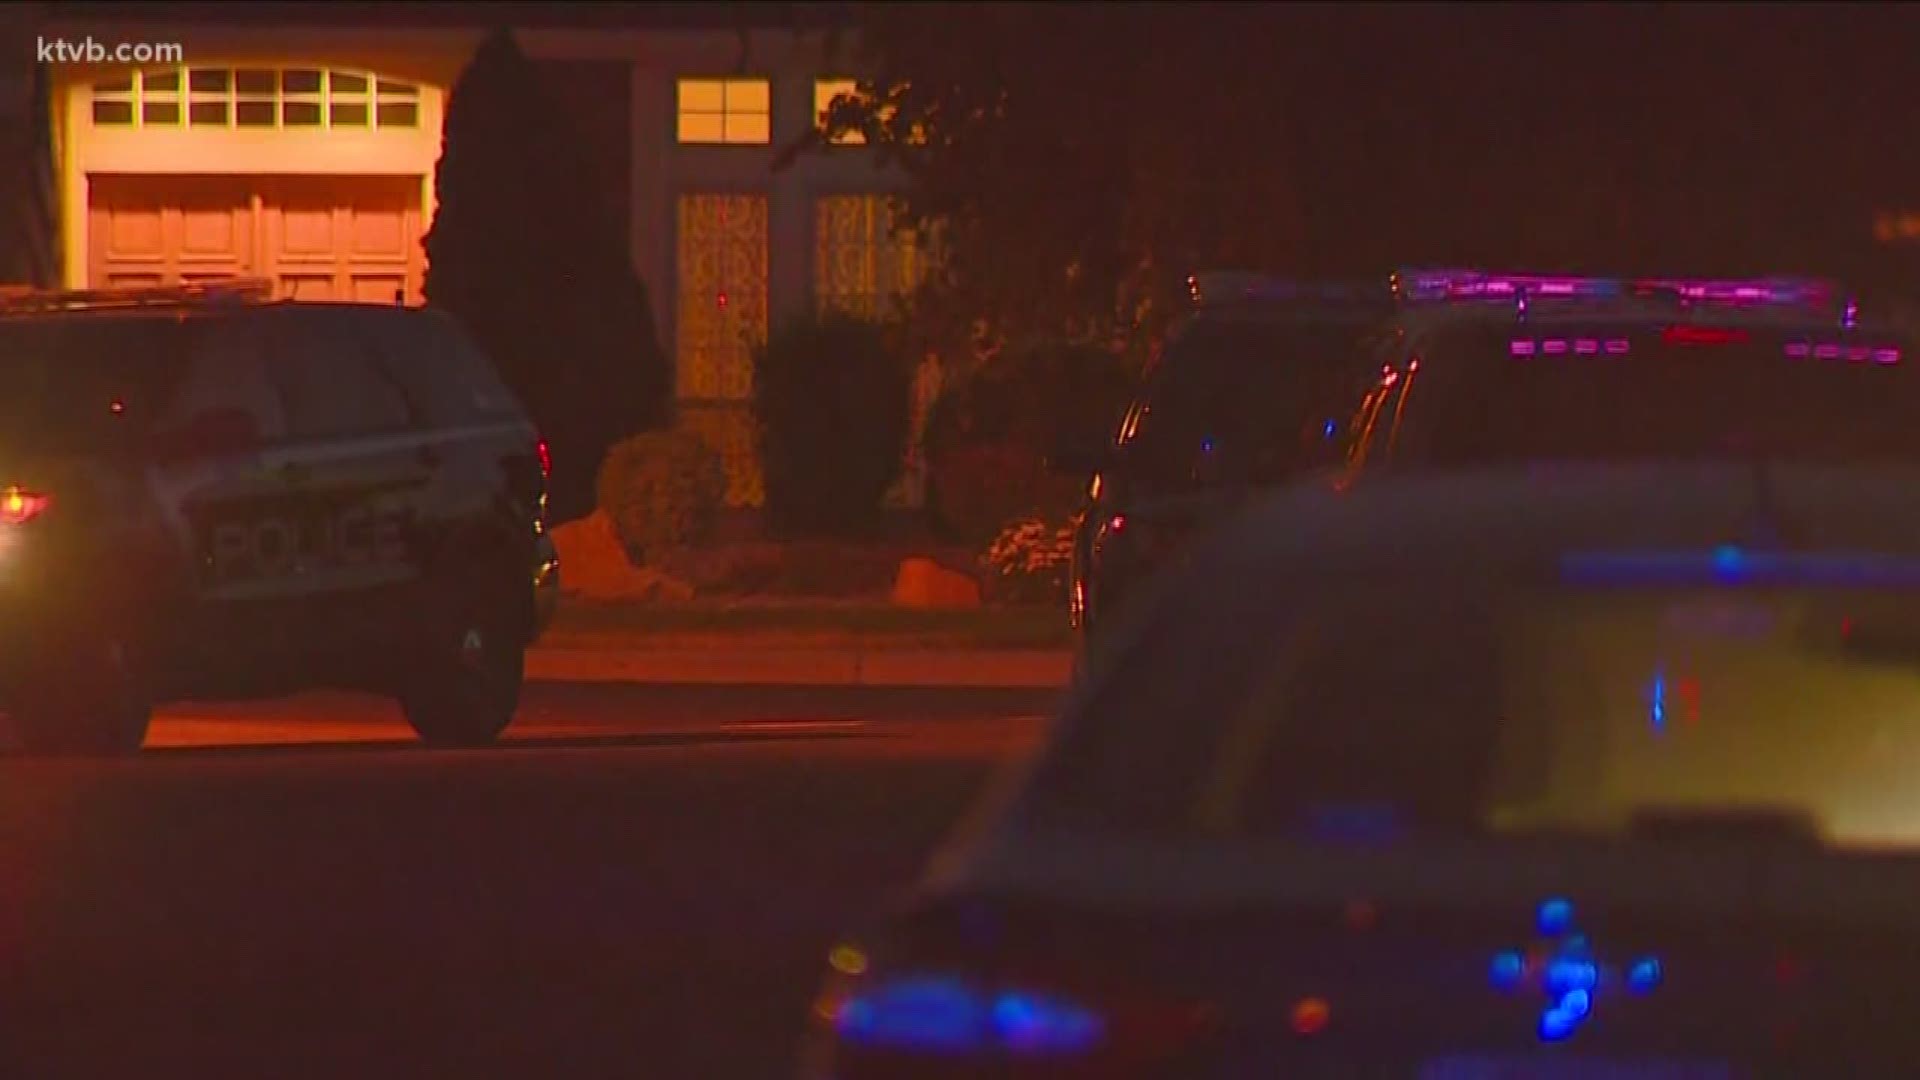 Police are searching for a man who opened fire in a West Boise neighborhood Sunday evening.